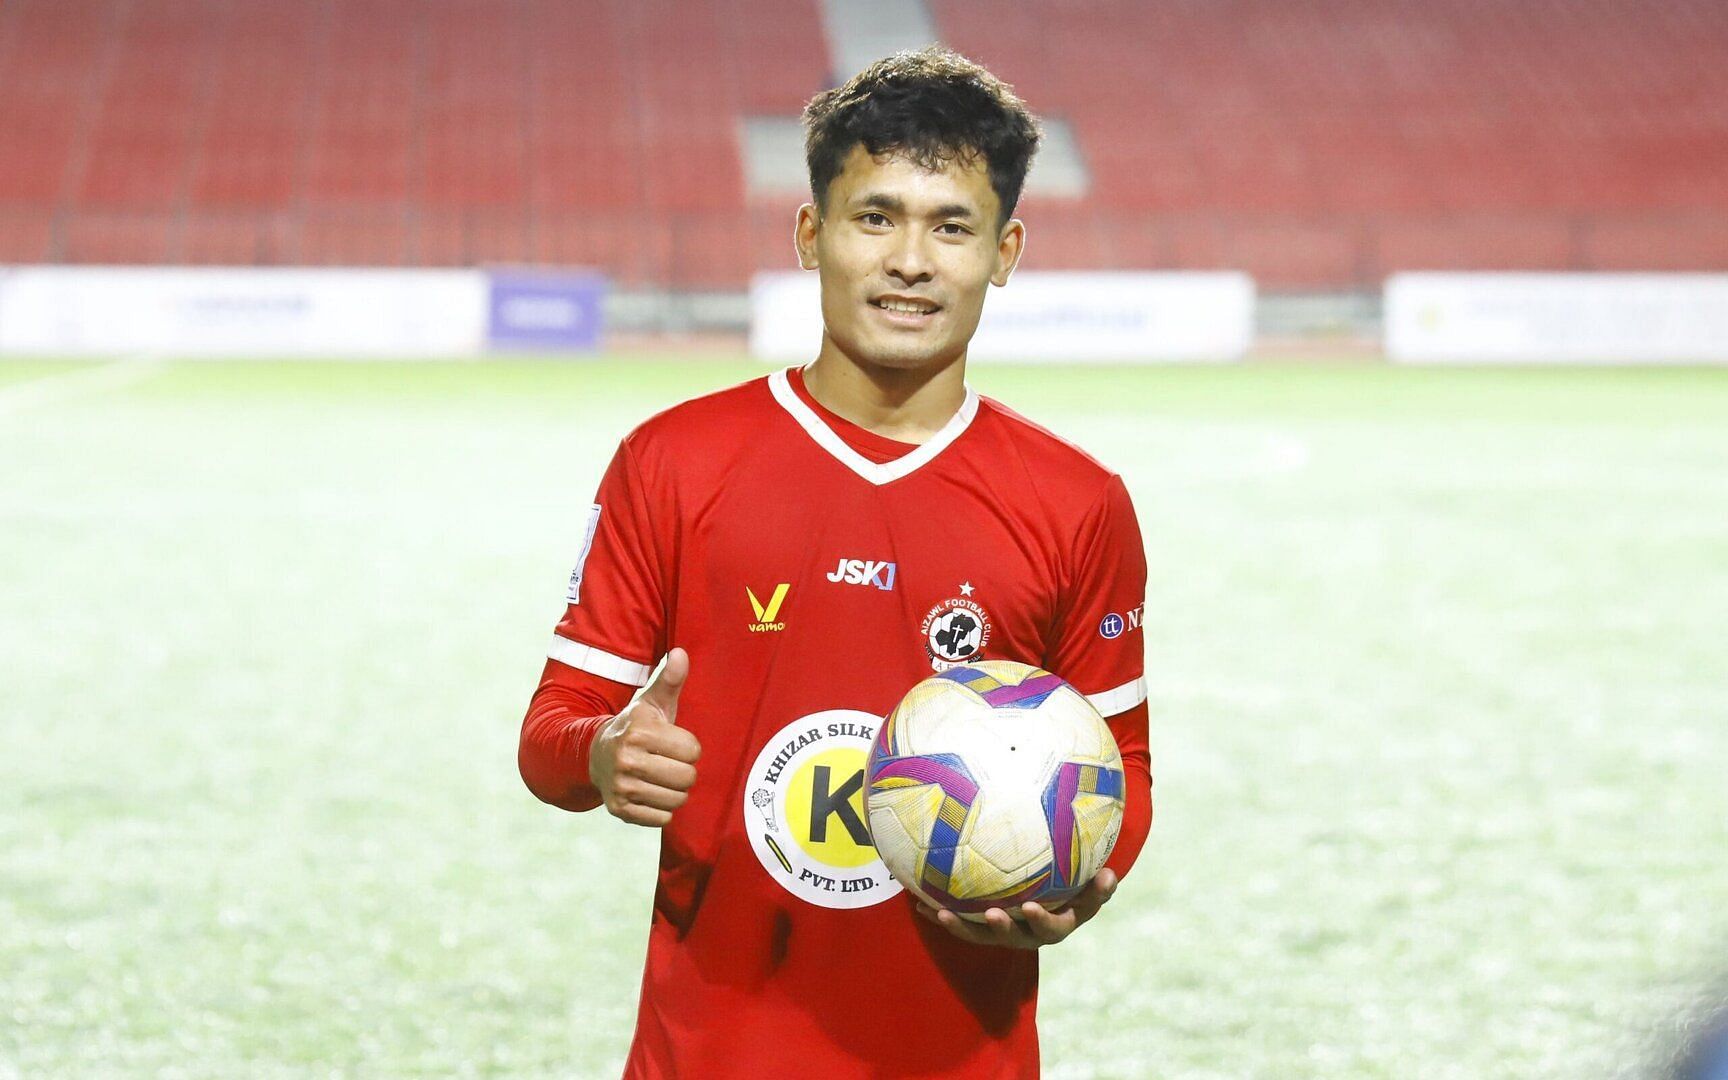 Three Indian Super League (ISL) clubs namely Jamshedpur FC, Punjab FC and the newly promoted Mohammedan SC are in the fray to sign Aizawl FC forward Lalrinzuala Lalbiaknia, according to 90nd stoppage